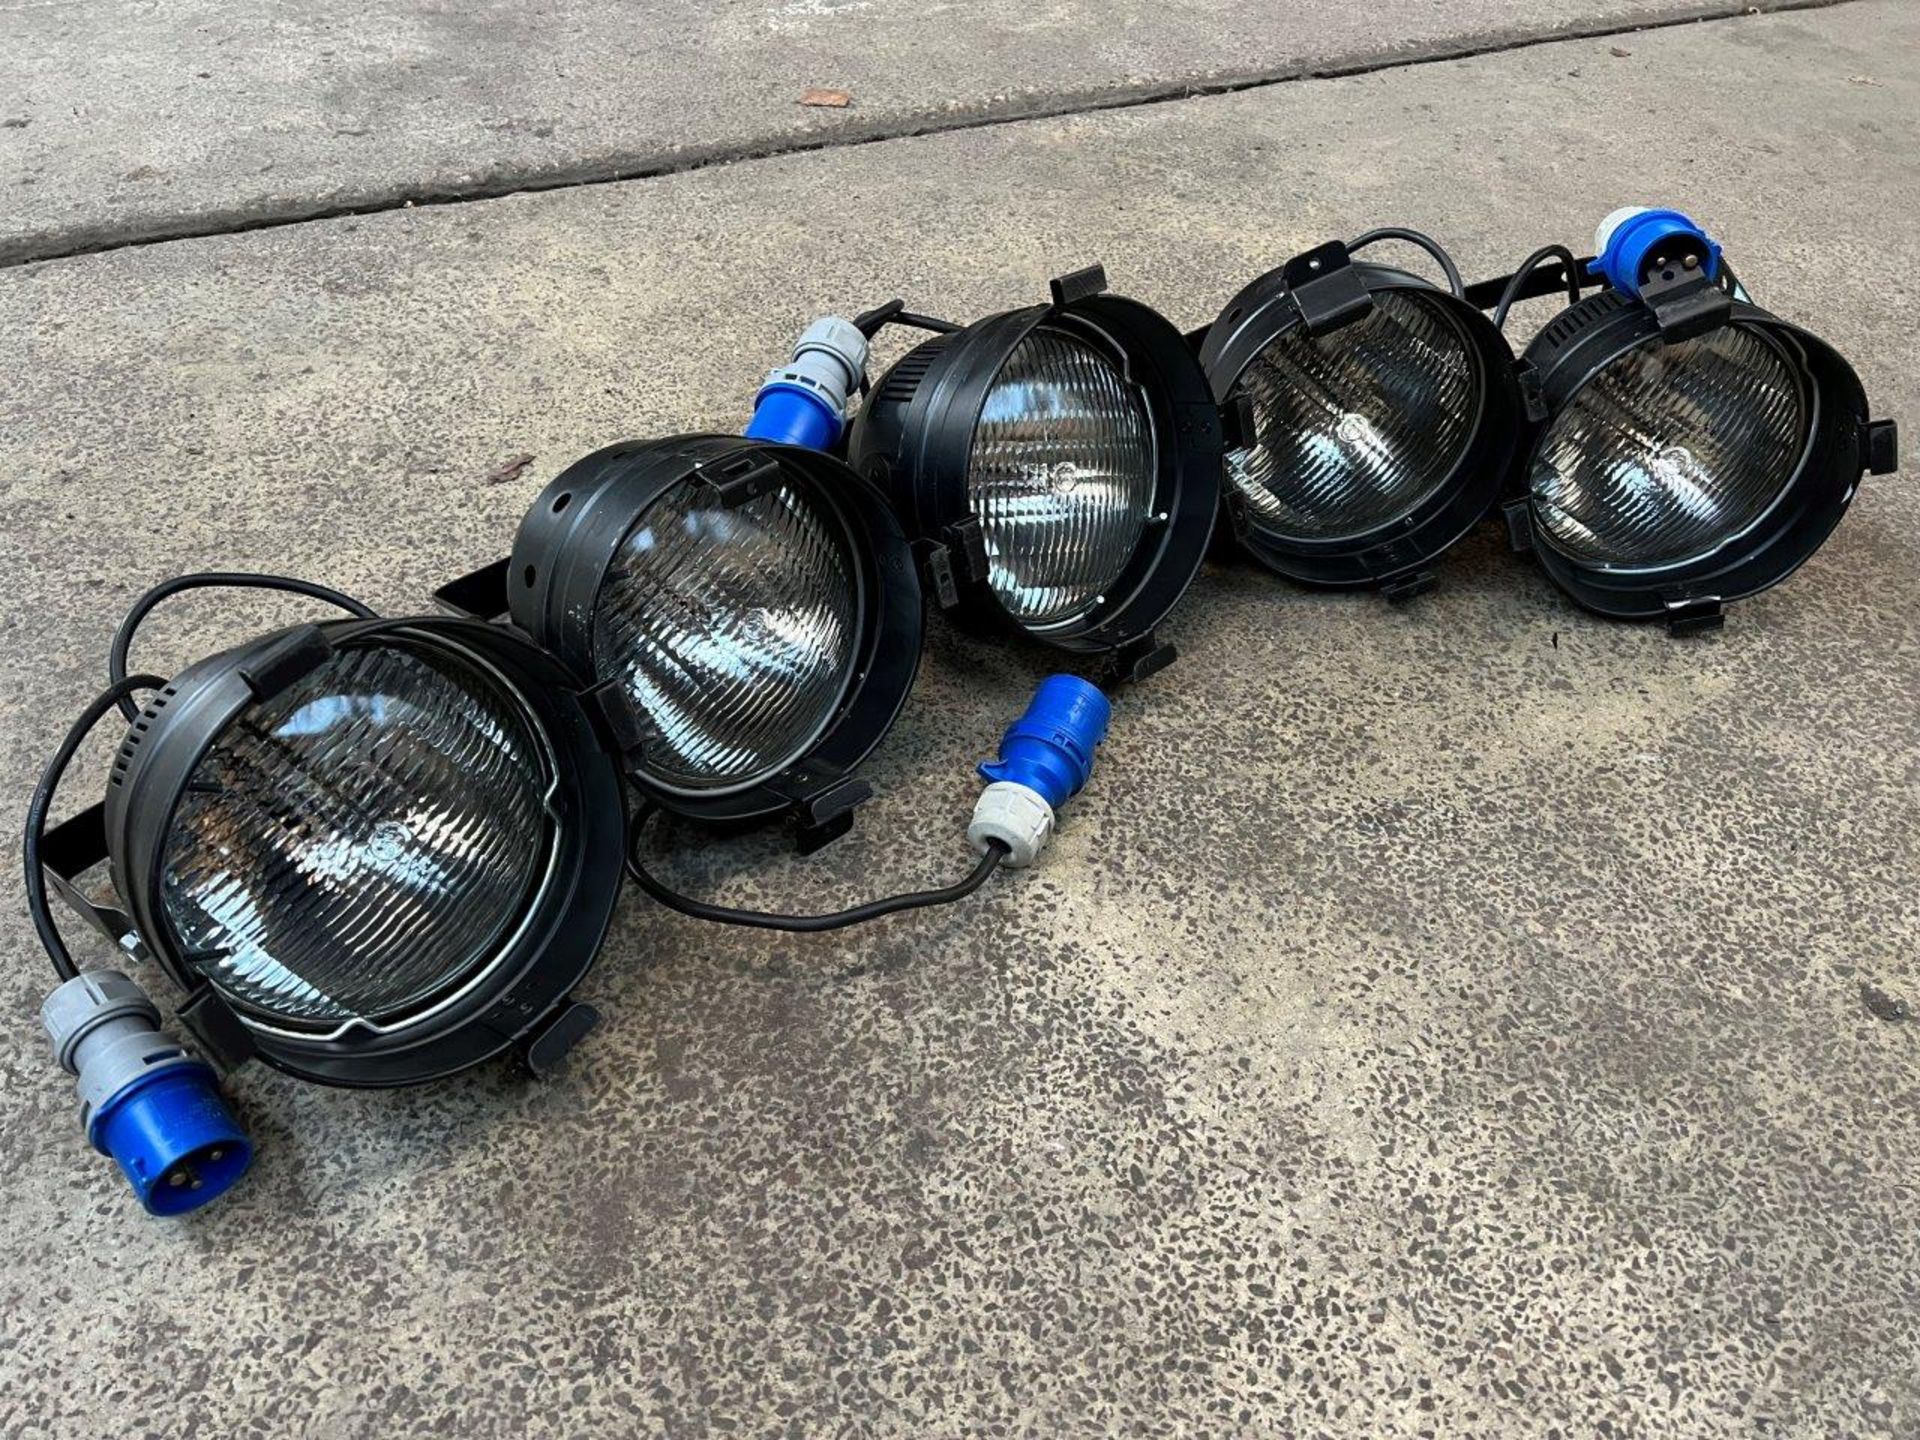 5 no PAR 56 300 watt spot lights with 16 amp lead, with two new bulbs. This lot is subject to VAT